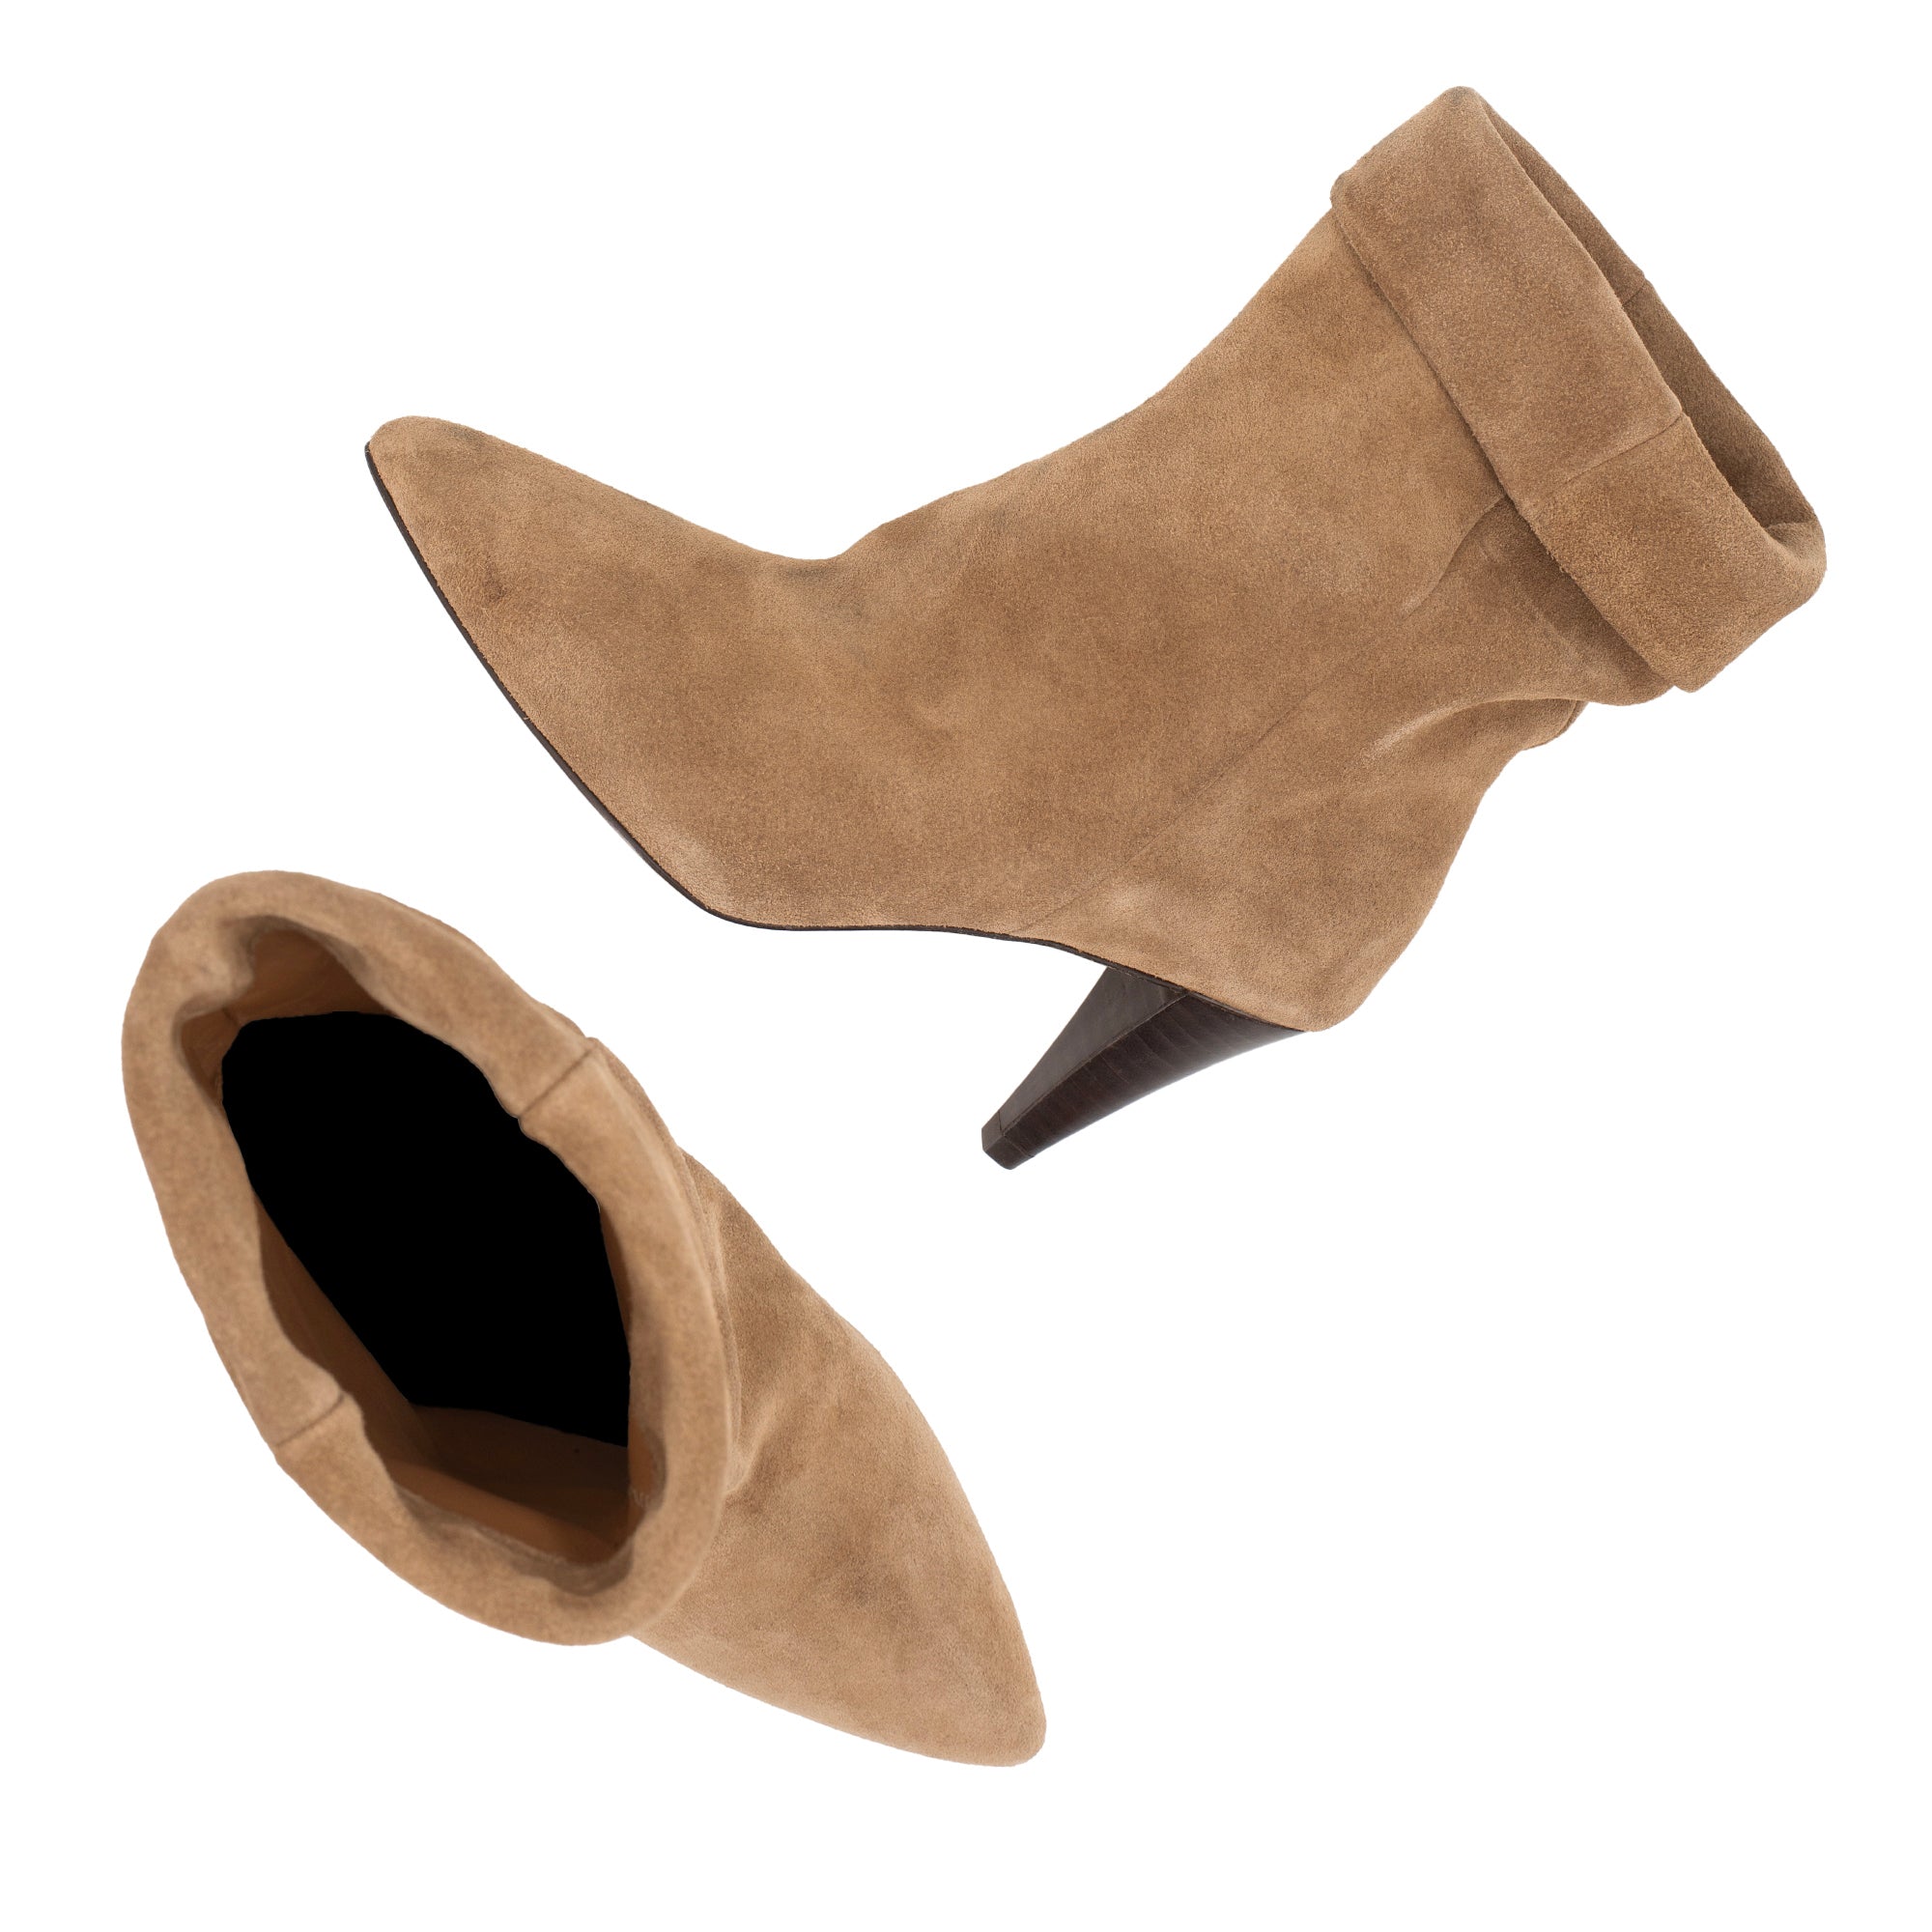 DUSTY SUEDE ANKLE BOOTS